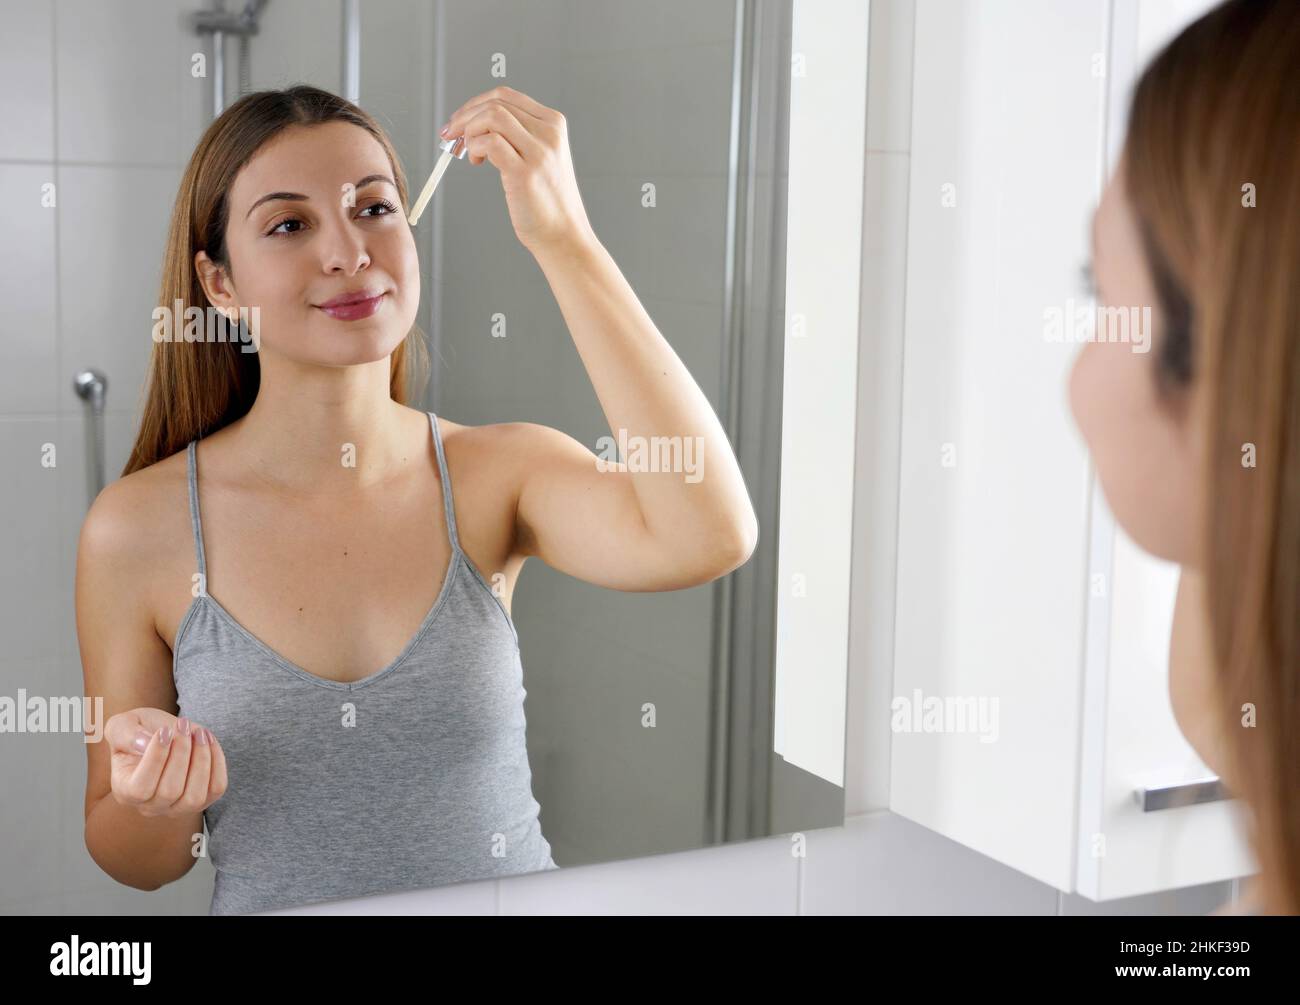 Young Skin Care Routine. Beautiful girl applying a Vitamin C booster antioxidant ascorbic acid anti aging serum to her face while holding a pipette in Stock Photo